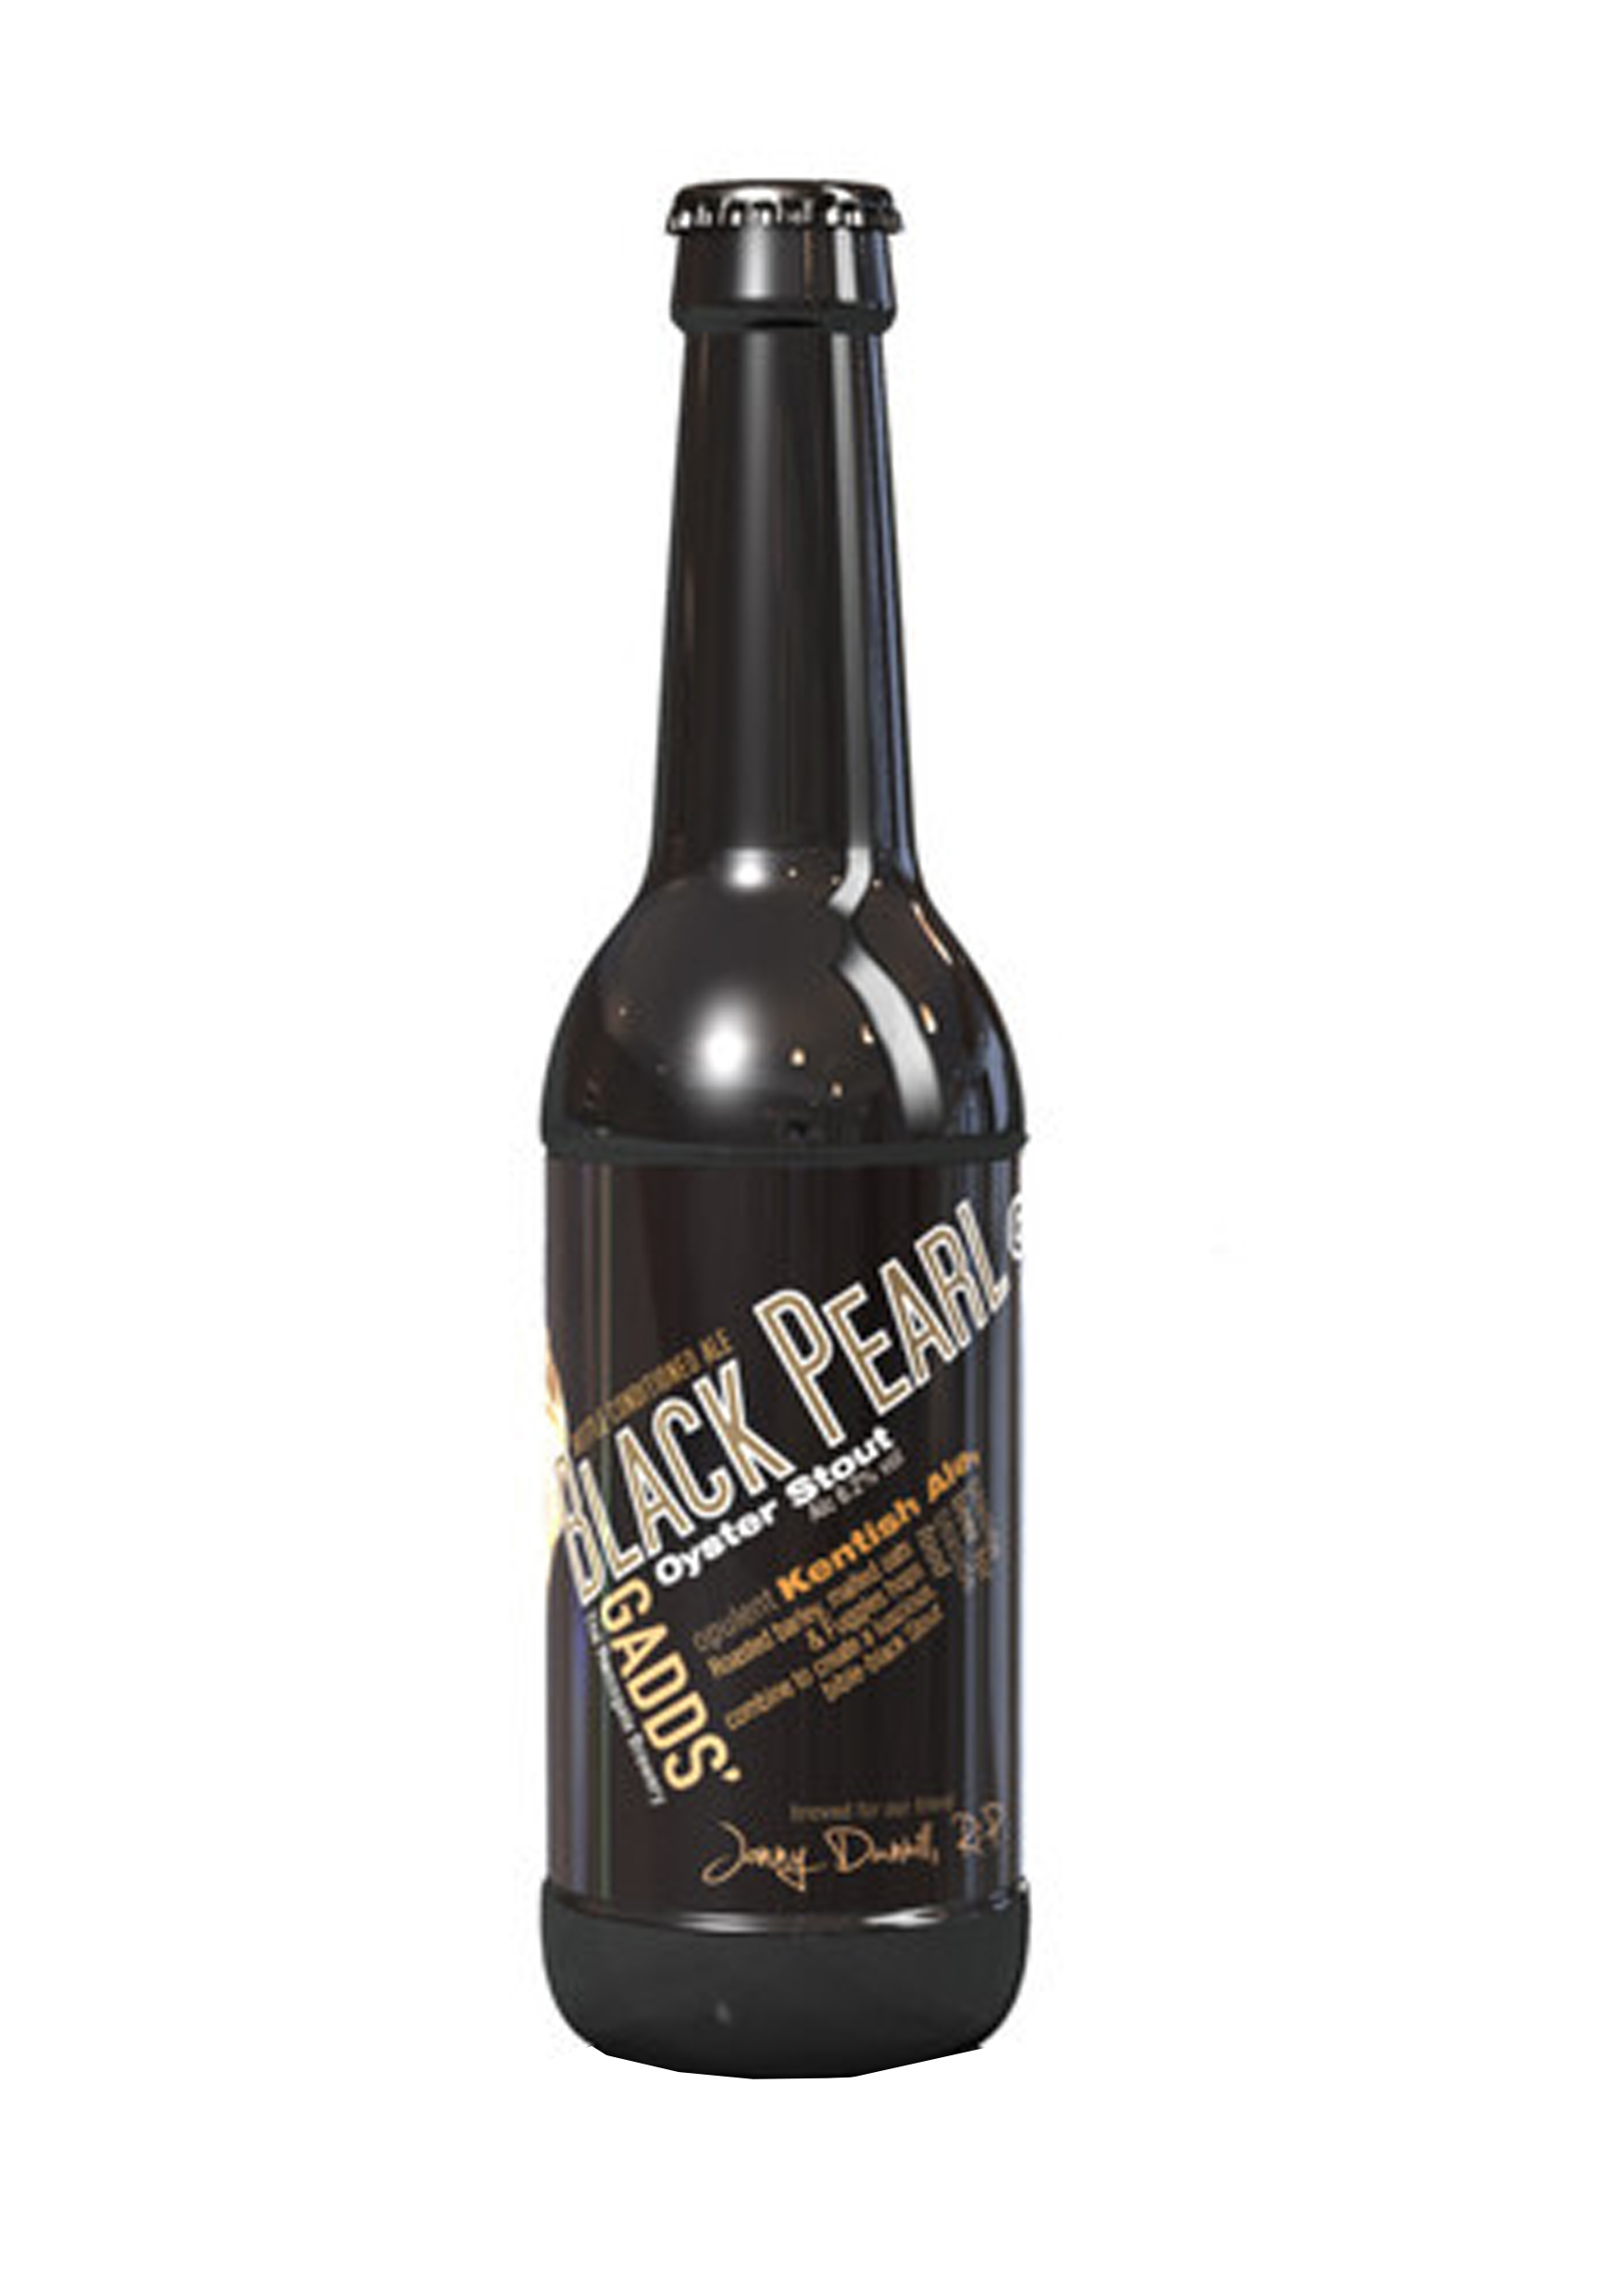 Gadds Black Pearl Oyster Stout